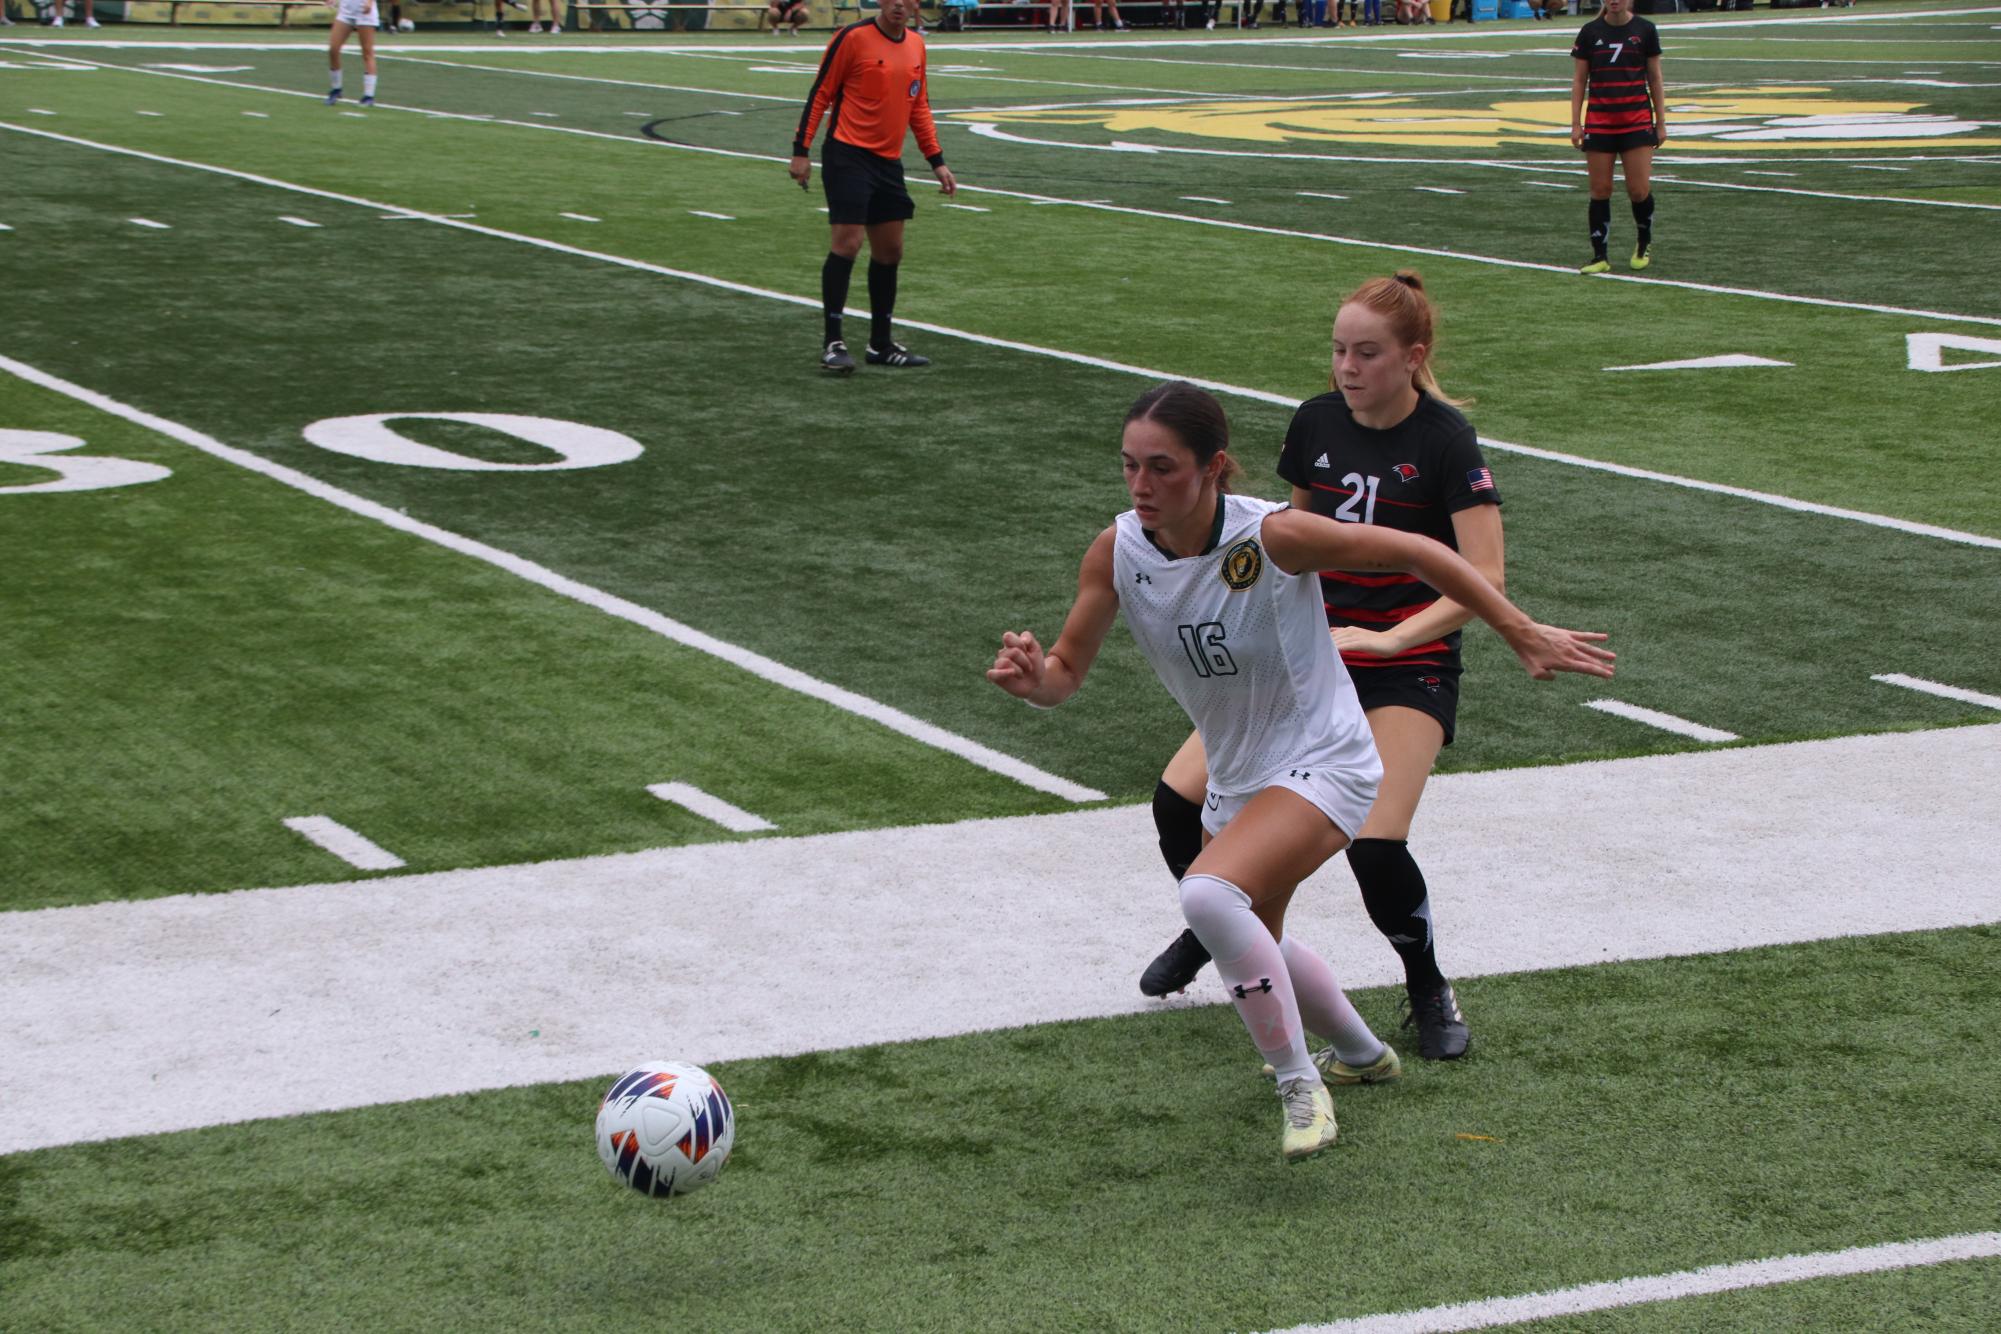 Senior SLU defender Nicole ONeill running to gain possession of the ball while shielding an opposing UIW player. (Sept. 24, 2023 - Hammond)